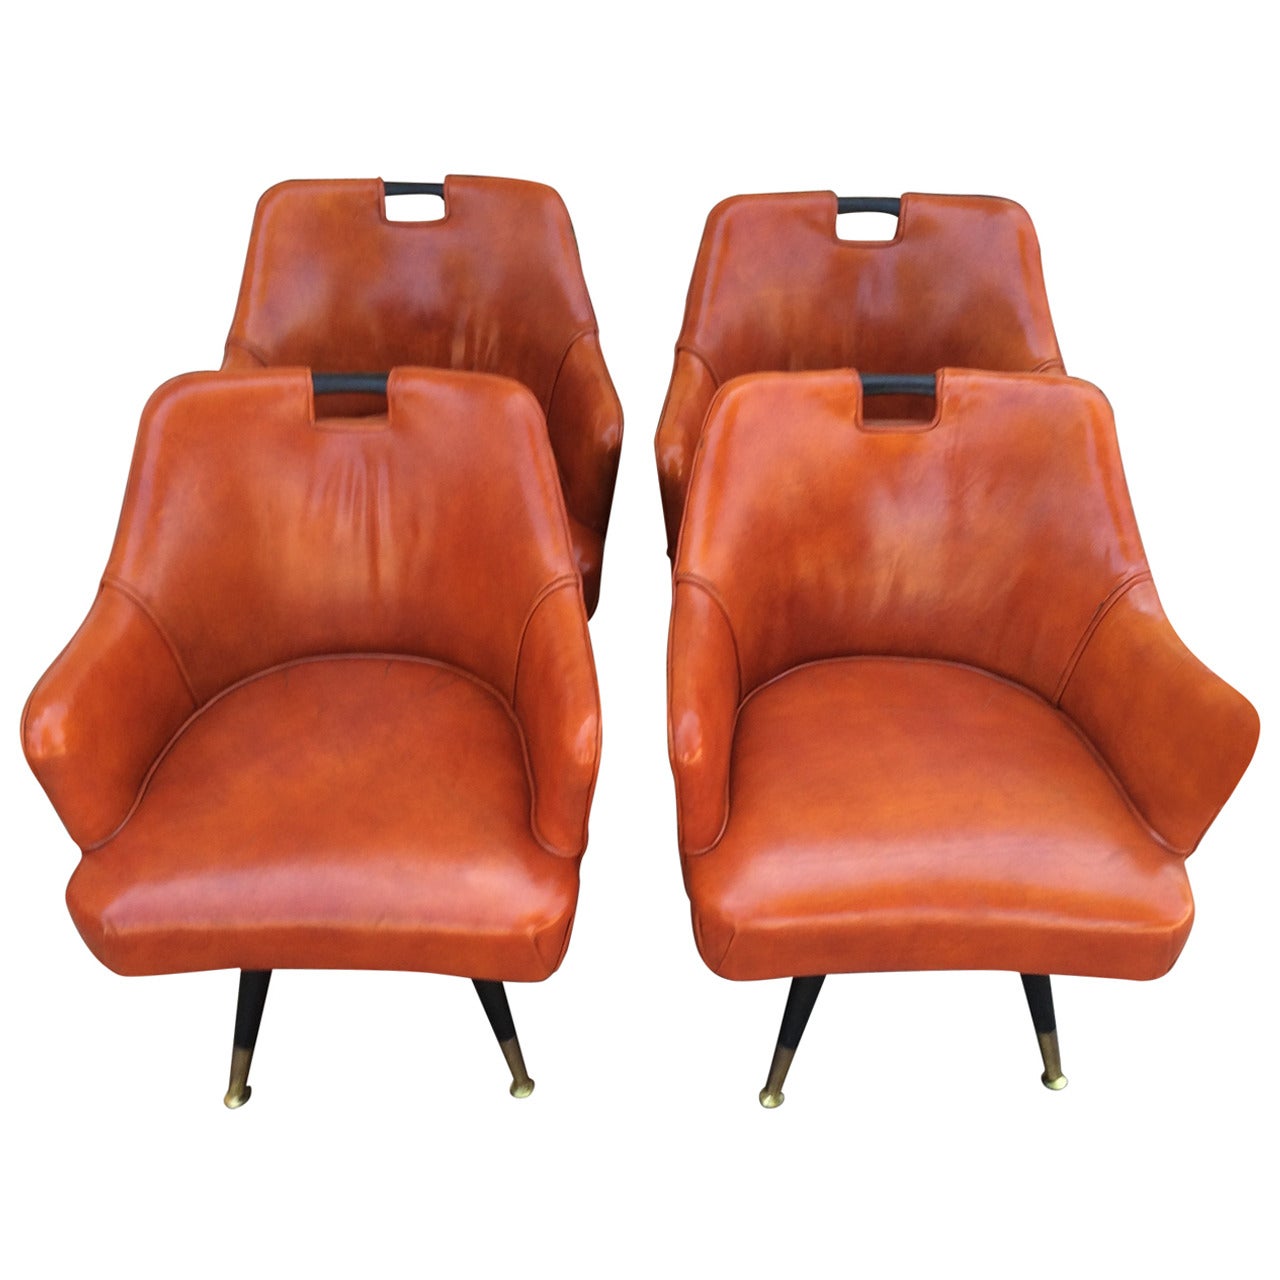 Four Mid-Century Leather Game Table Chairs